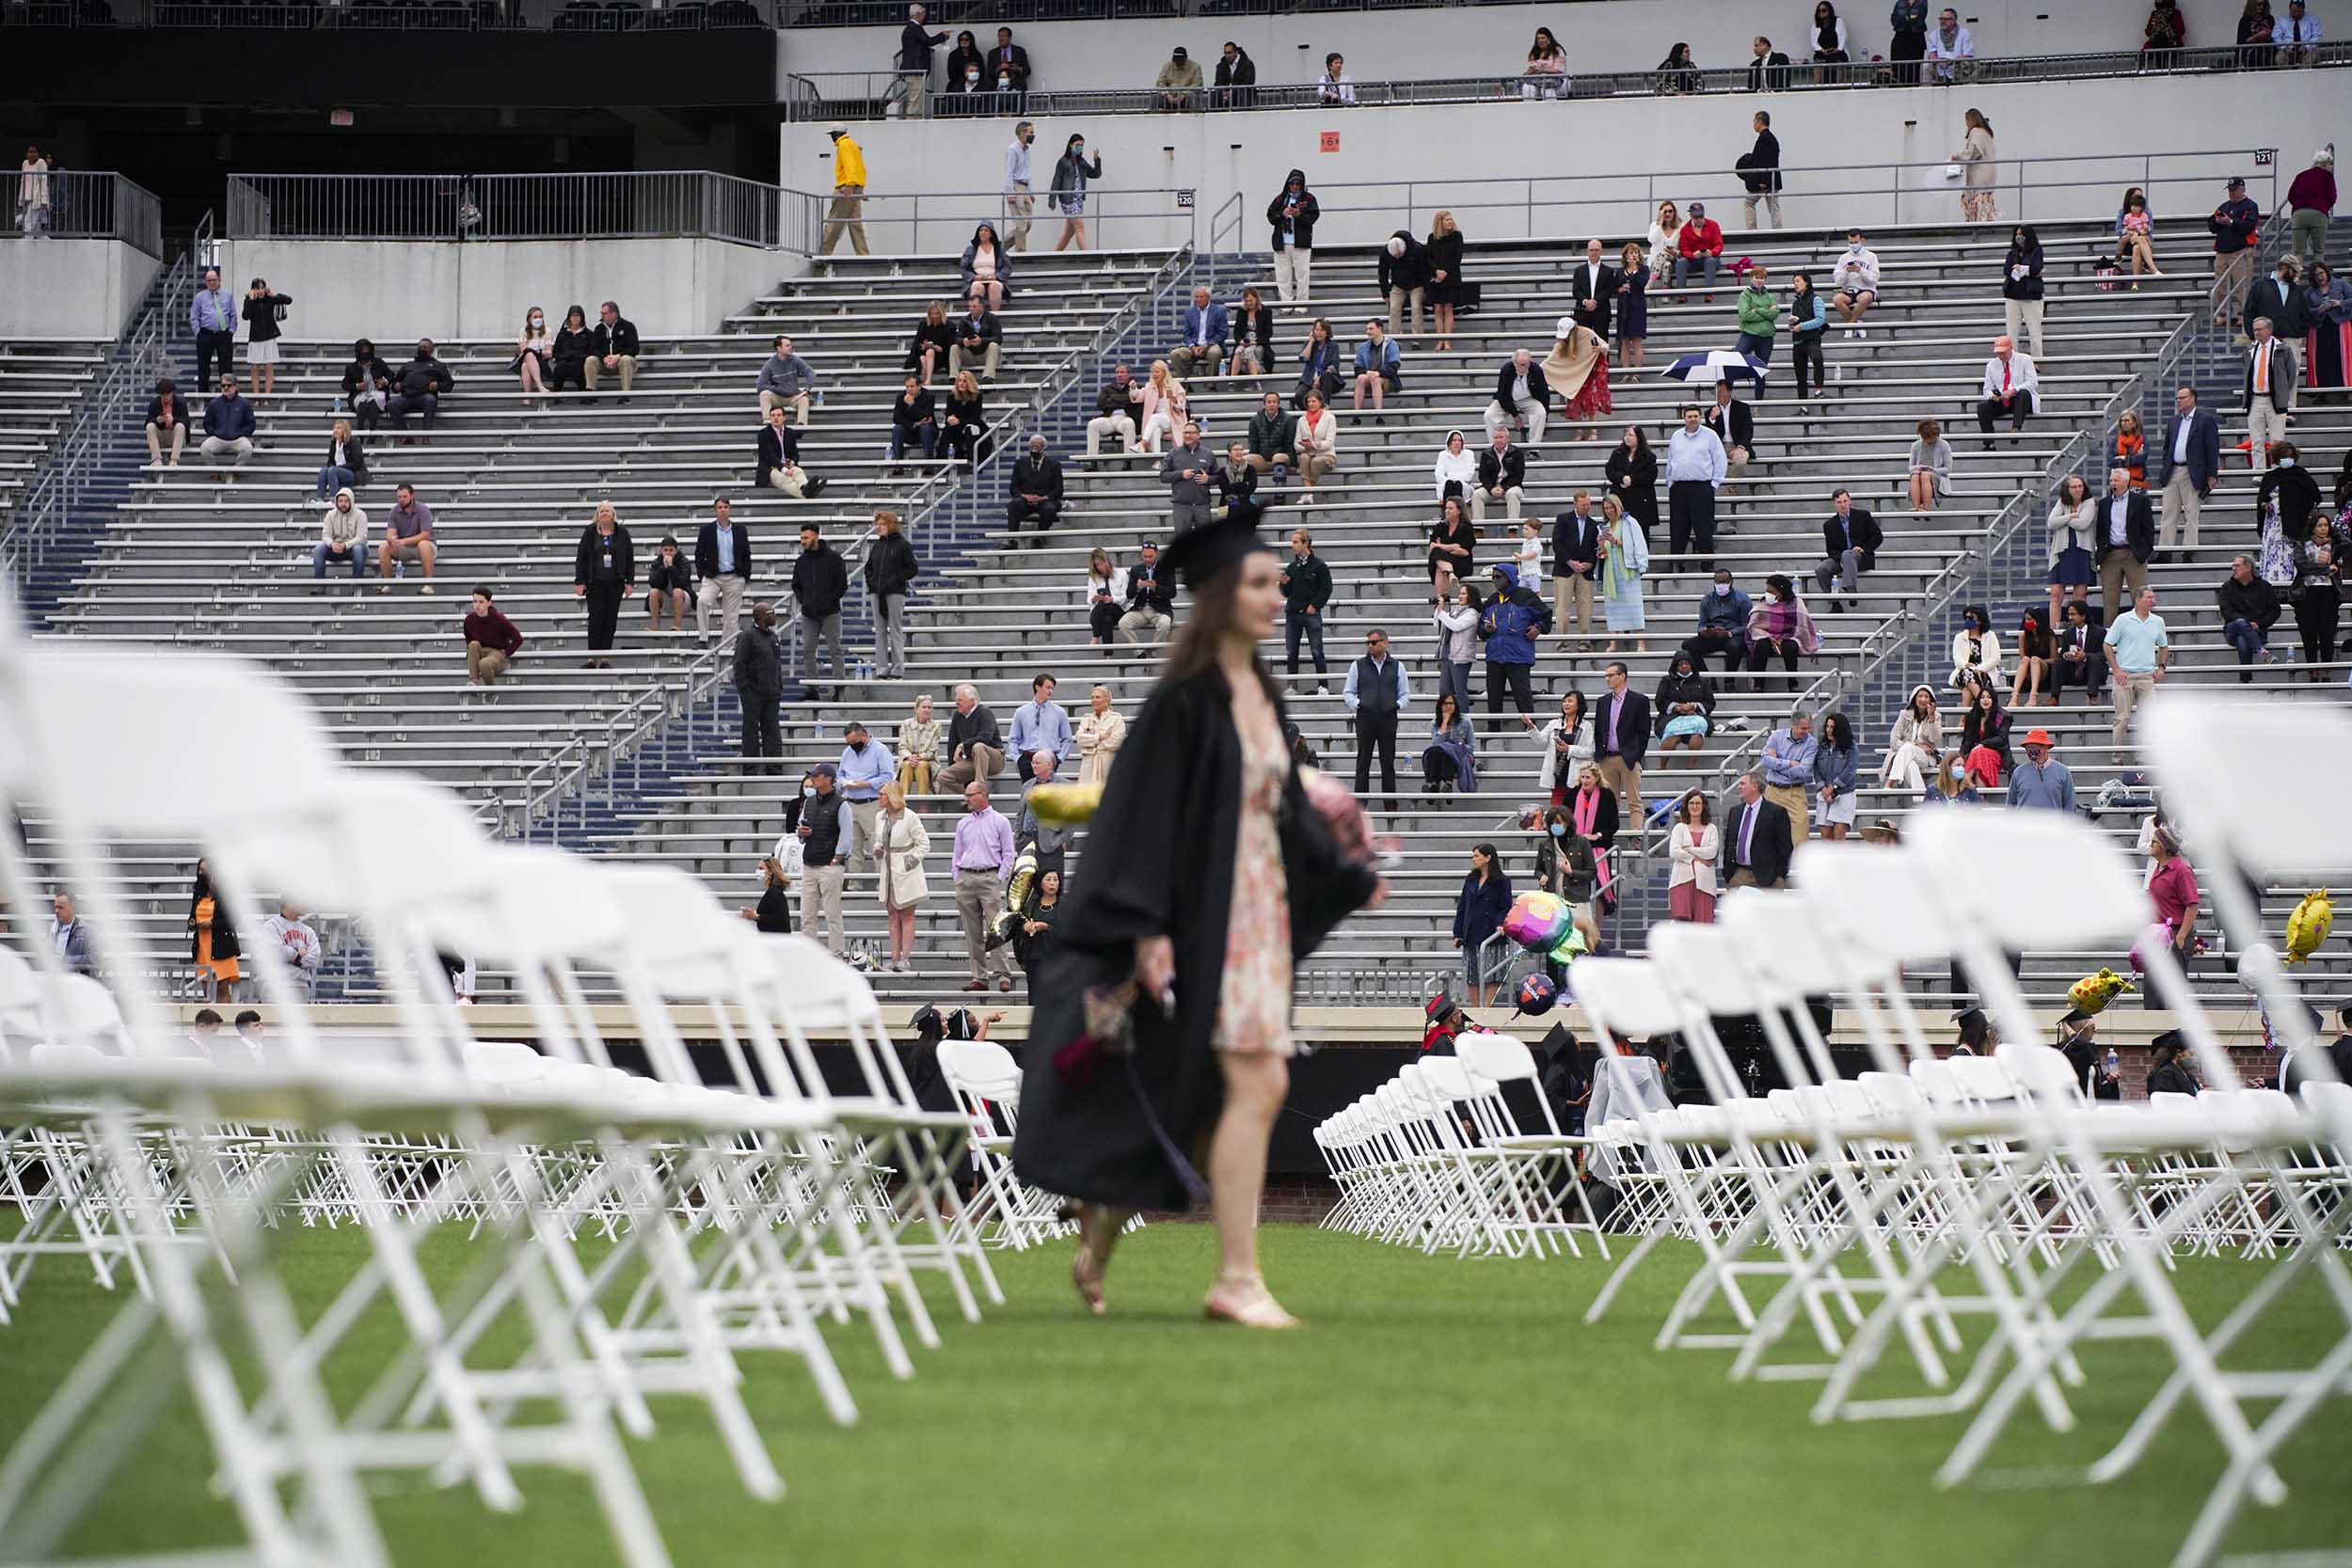 Families gather in the stadium socially distanced as a graduate walks to find a seat